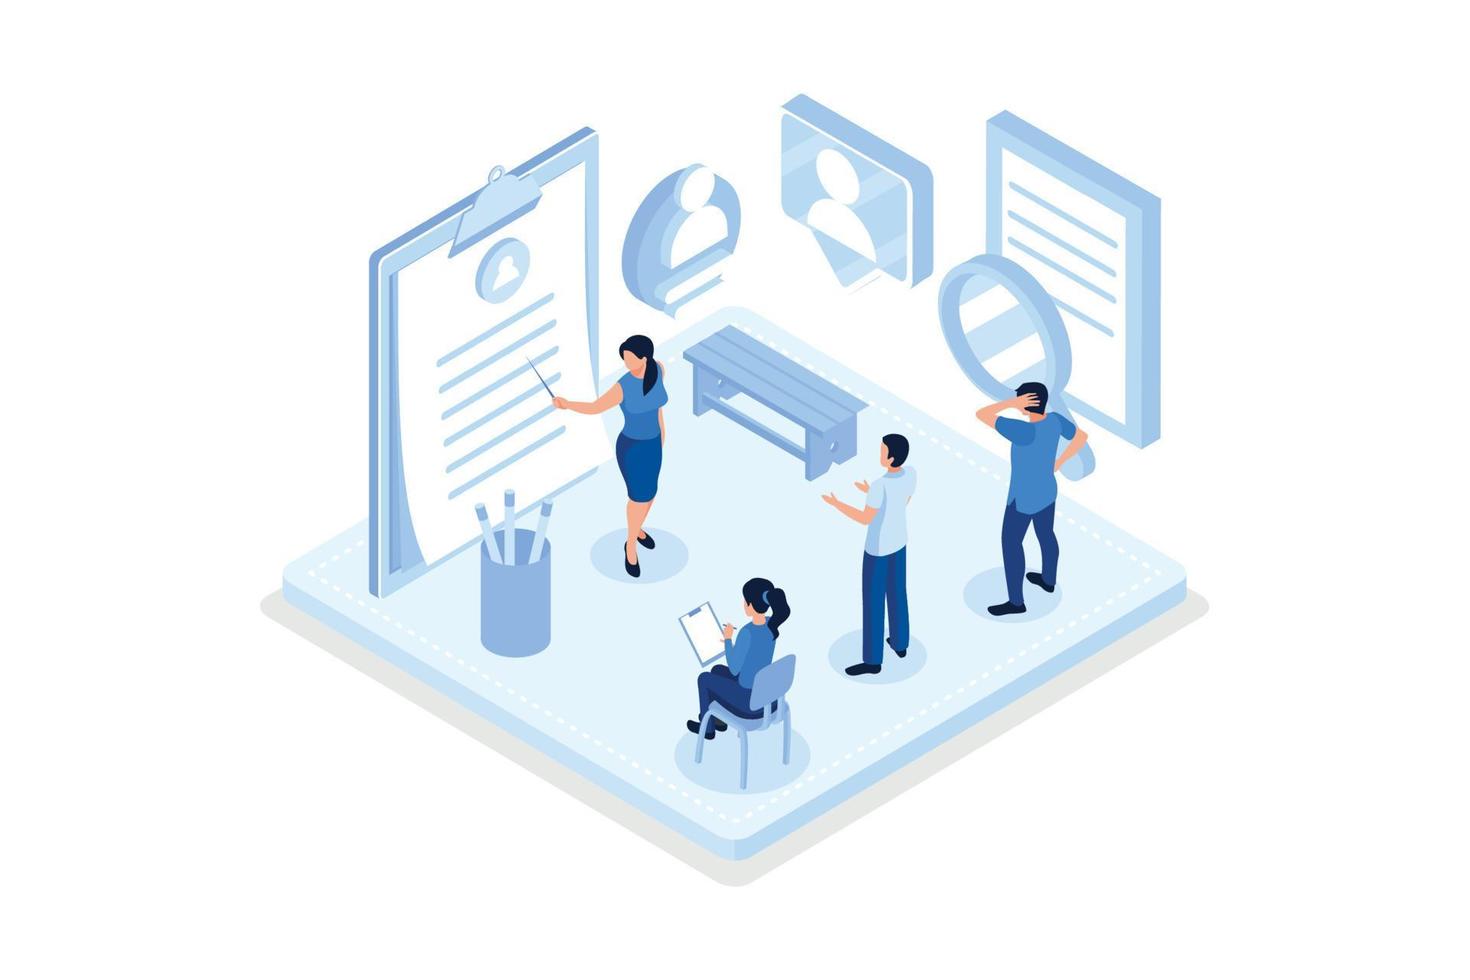 Hr manager presenting potential job candidate. Recruitment process. Human resource management and hiring concept, isometric vector modern illustration